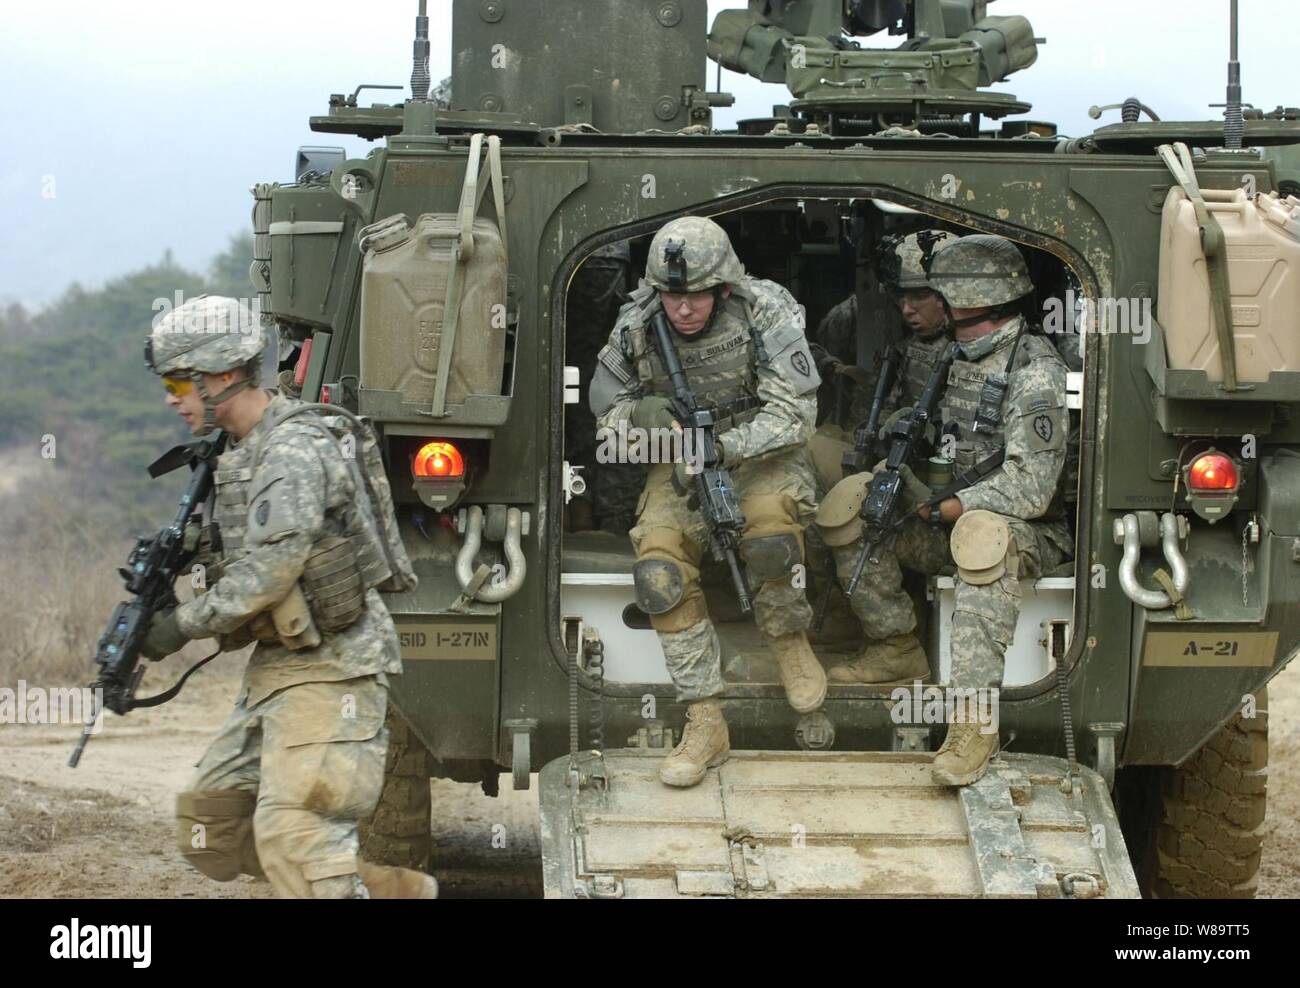 U.S. Army soldiers from Alpha Company, 1st Battalion, 27th Infantry Regiment, 2nd Stryker Brigade Combat Team exit their M1126 Stryker Infantry Carrier Vehicle during dismounted maneuvers at Warrior Valley on Rodriguez Range Complex, South Korea, on March 24, 2007, as part of exercise Foal Eagle 2007.  The annual joint command post and field training exercise improves combat readiness and joint and combined interoperability. Stock Photo